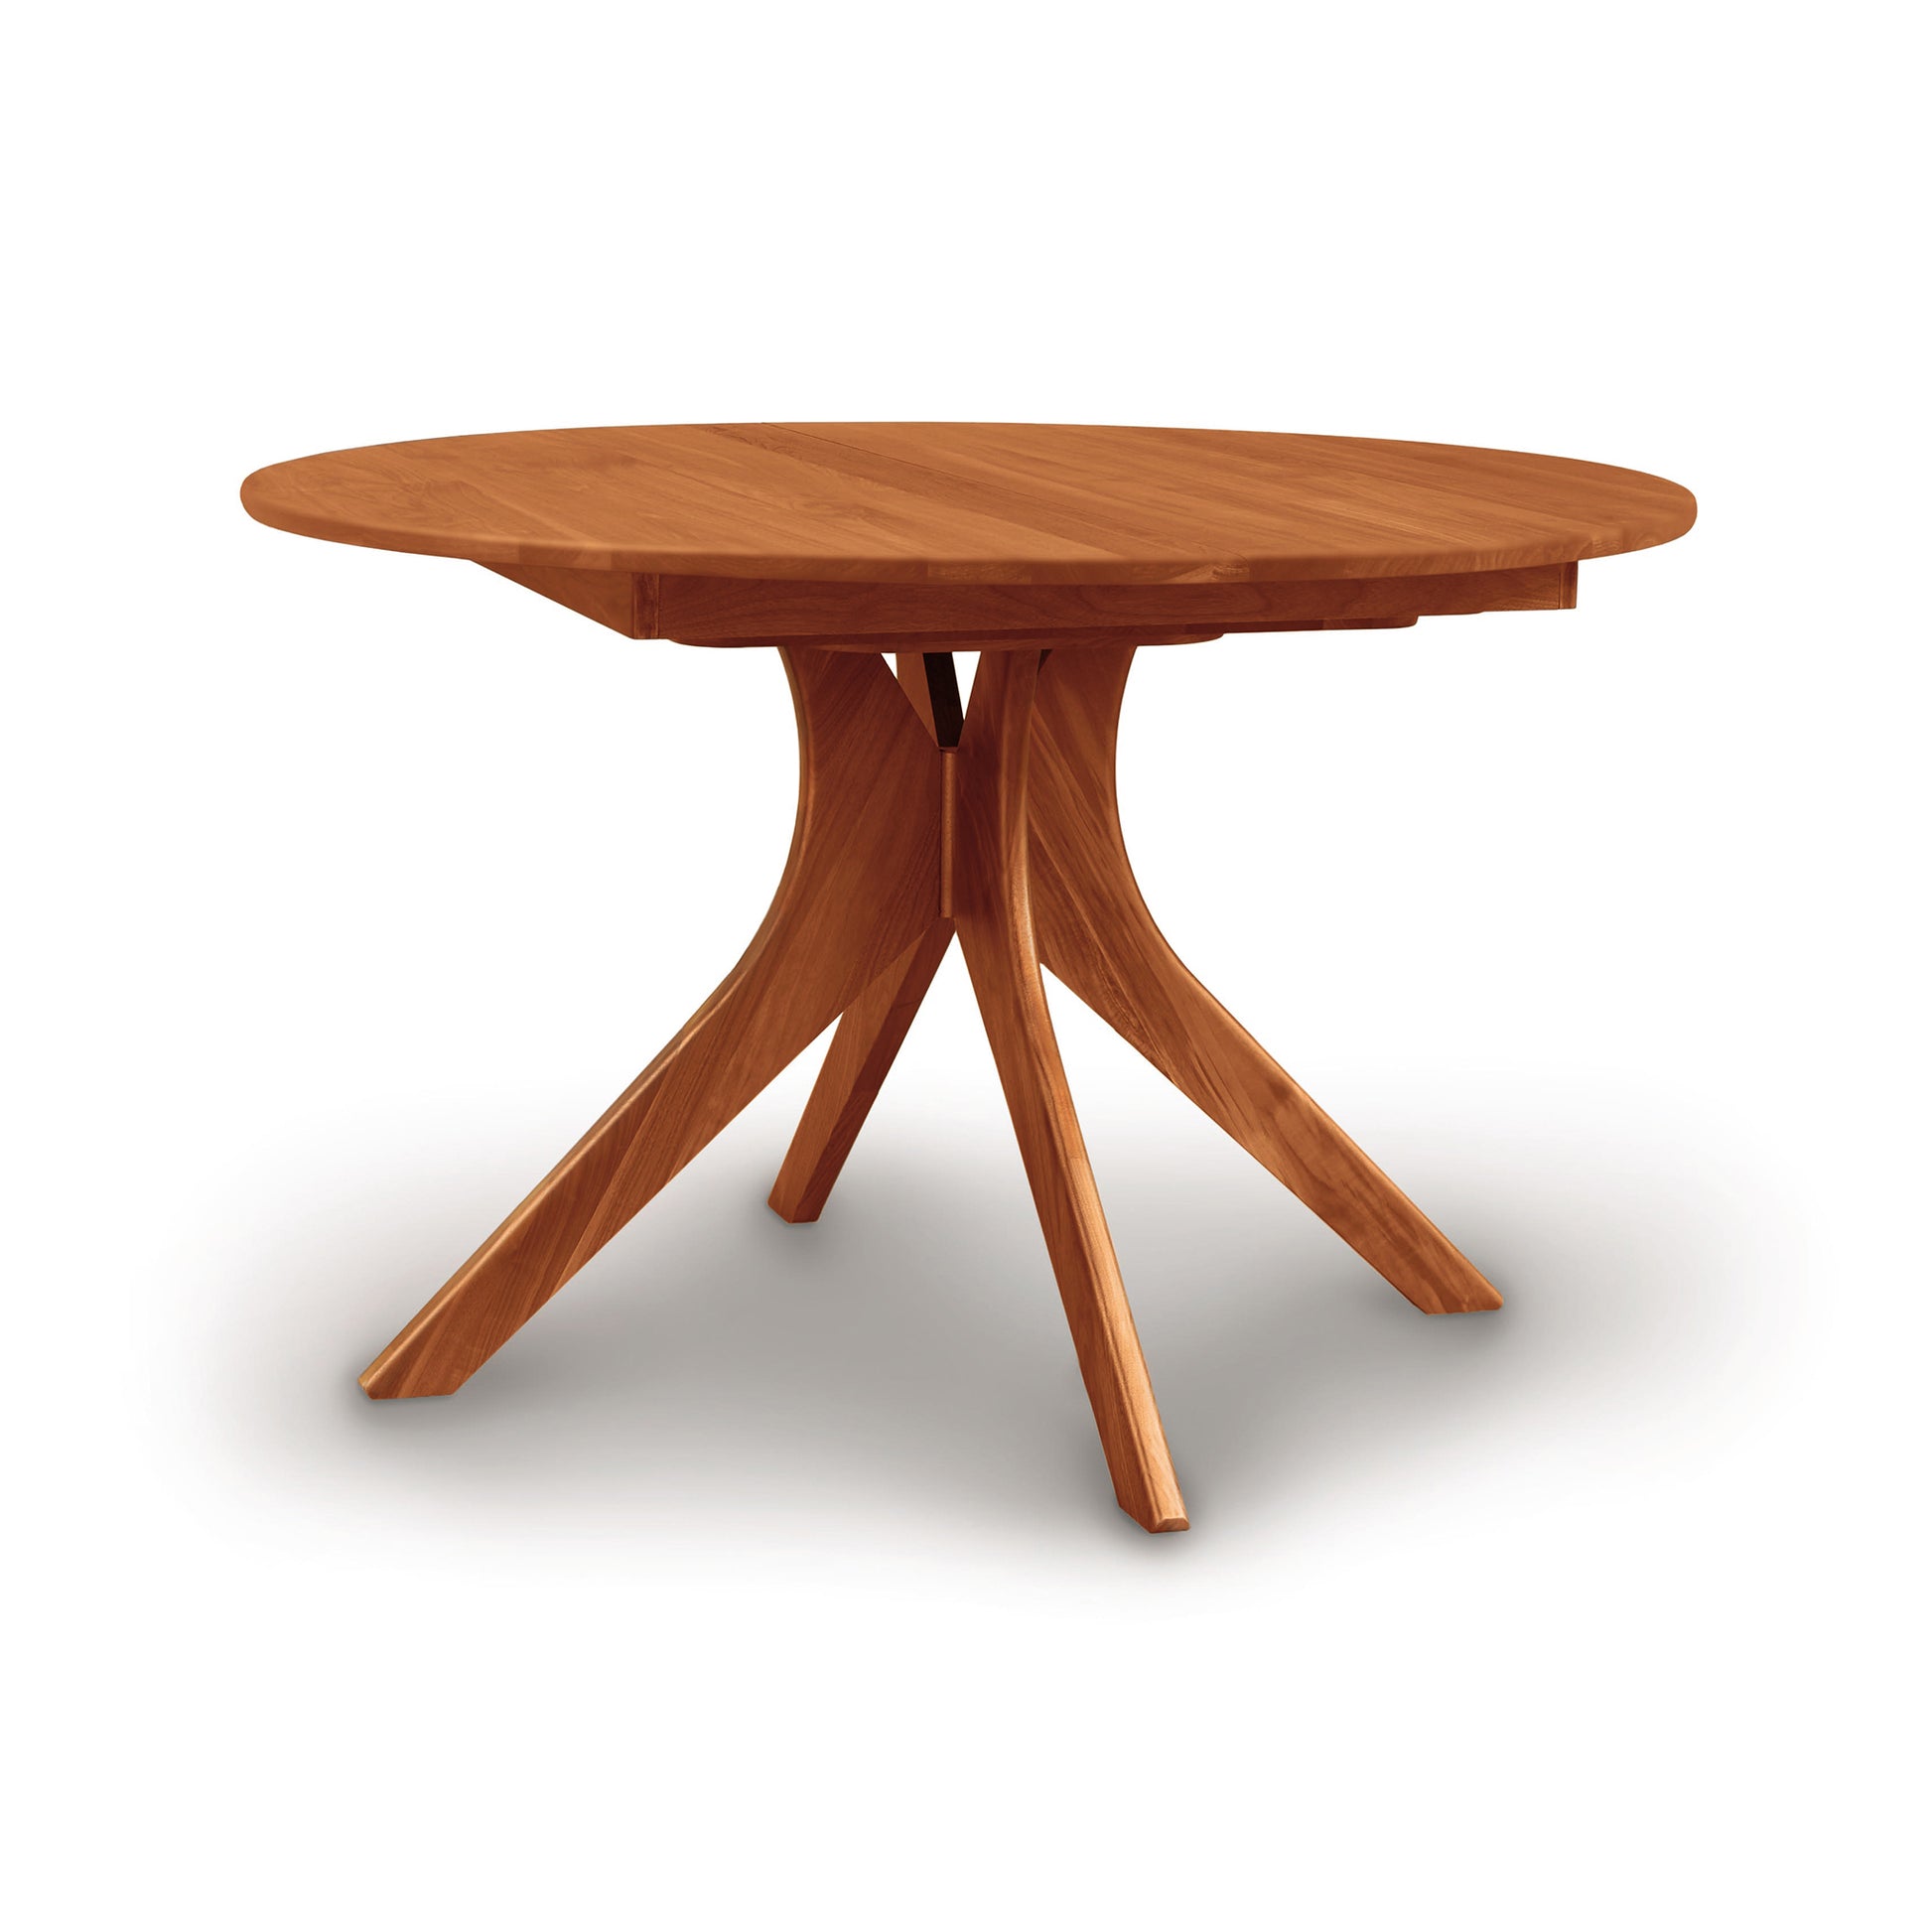 A solid wood Copeland Furniture Audrey Round Extension Dining Table with a round top and a unique star-shaped base, isolated on a white background.